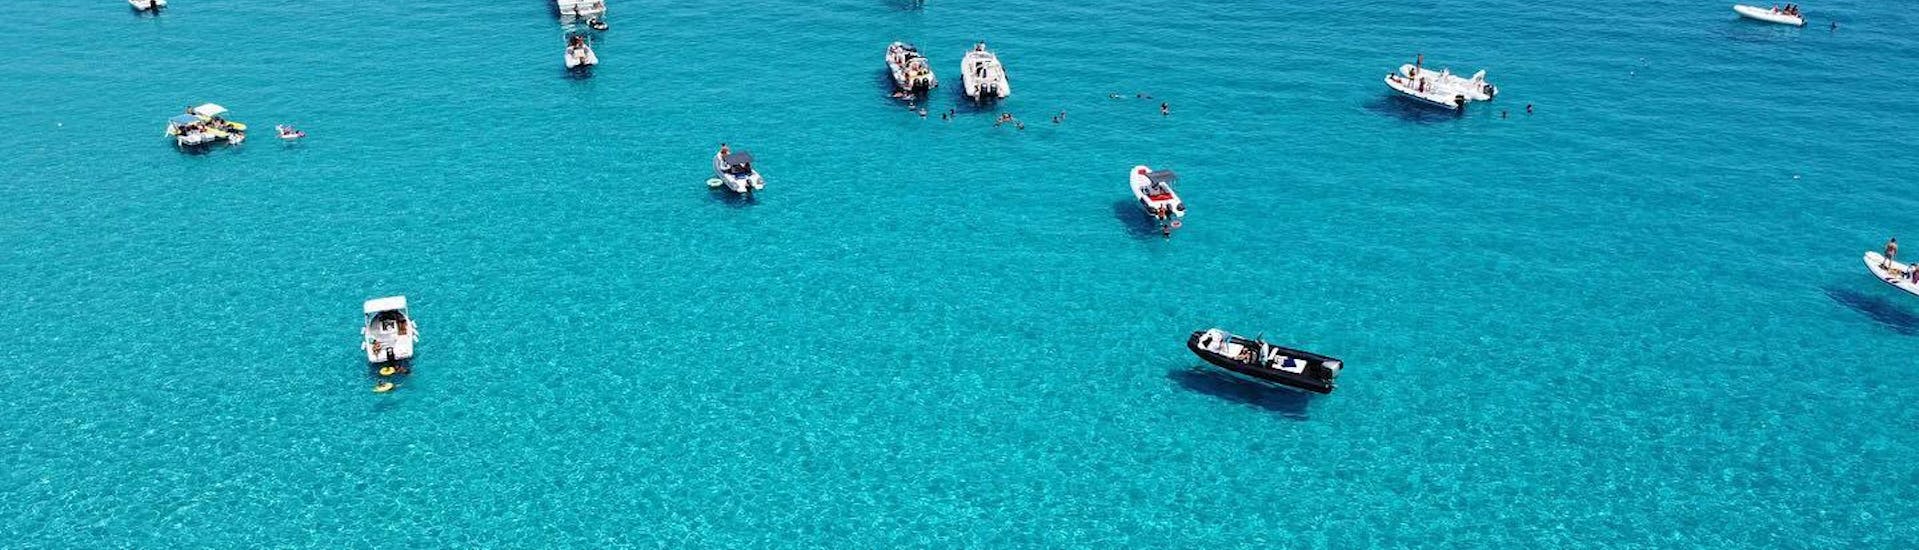 Boats are mooring in the crystal clear water off the coast during one the Private Boat Trip from Castellamare to Riserva dello Zingaro.